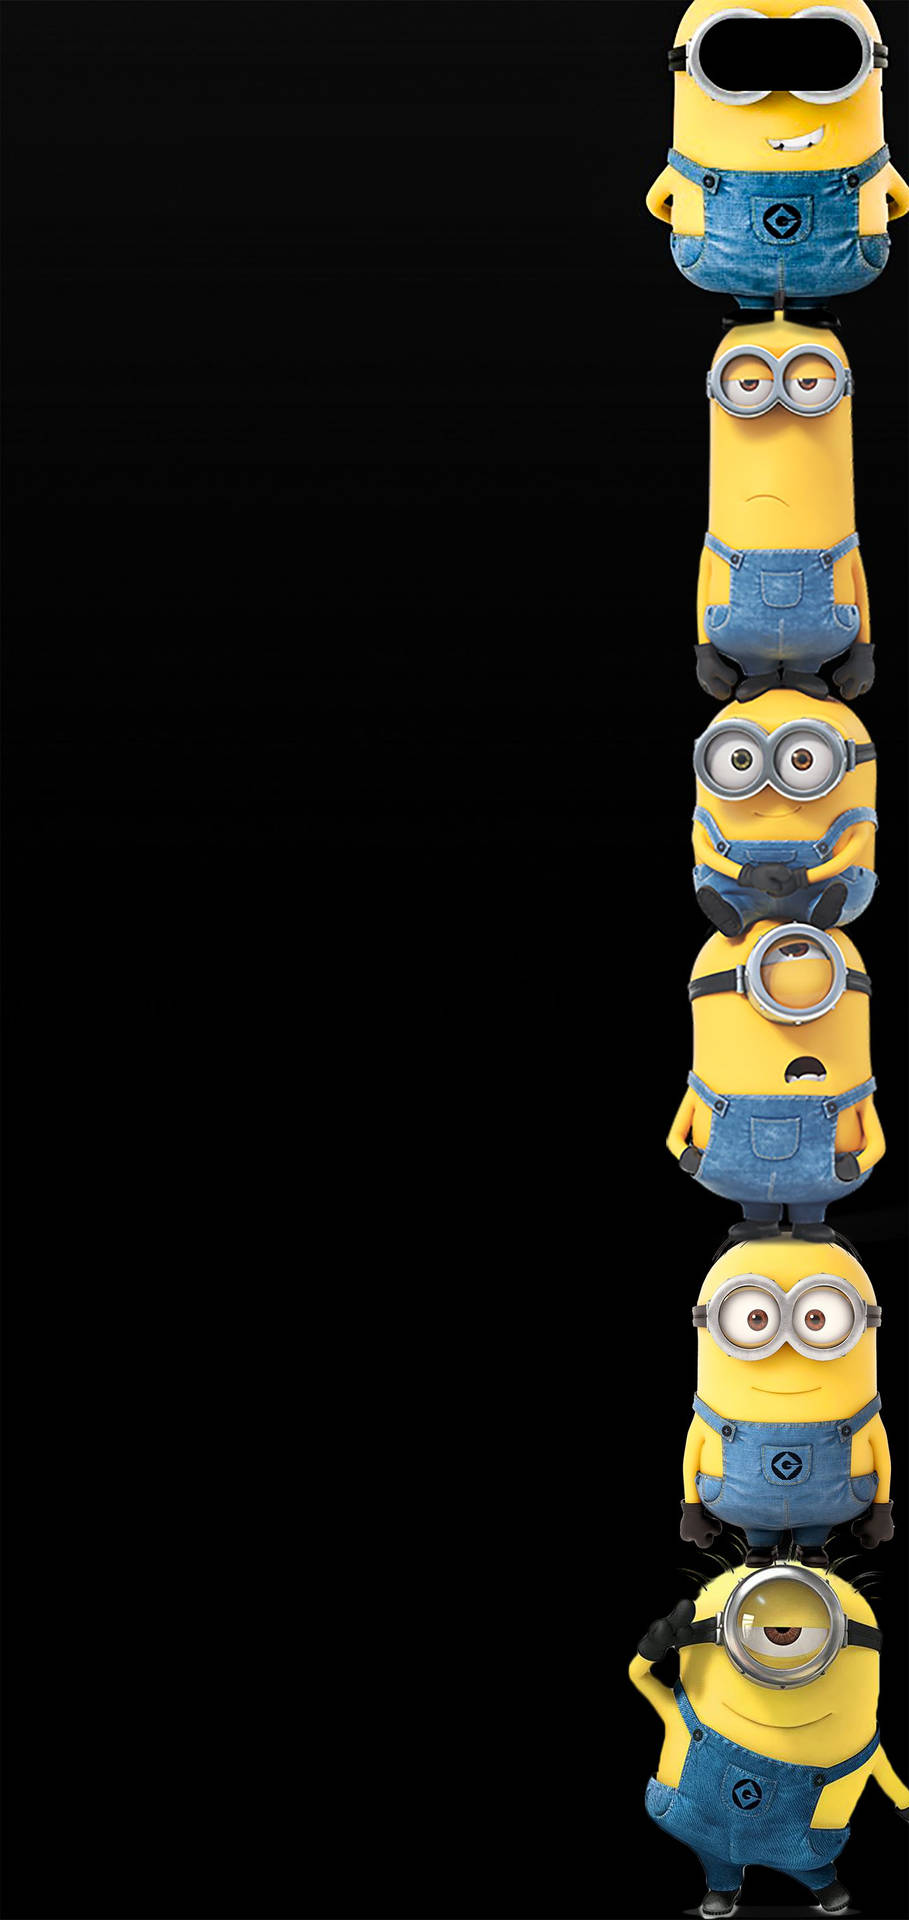 S10+ Adorable Minions Background